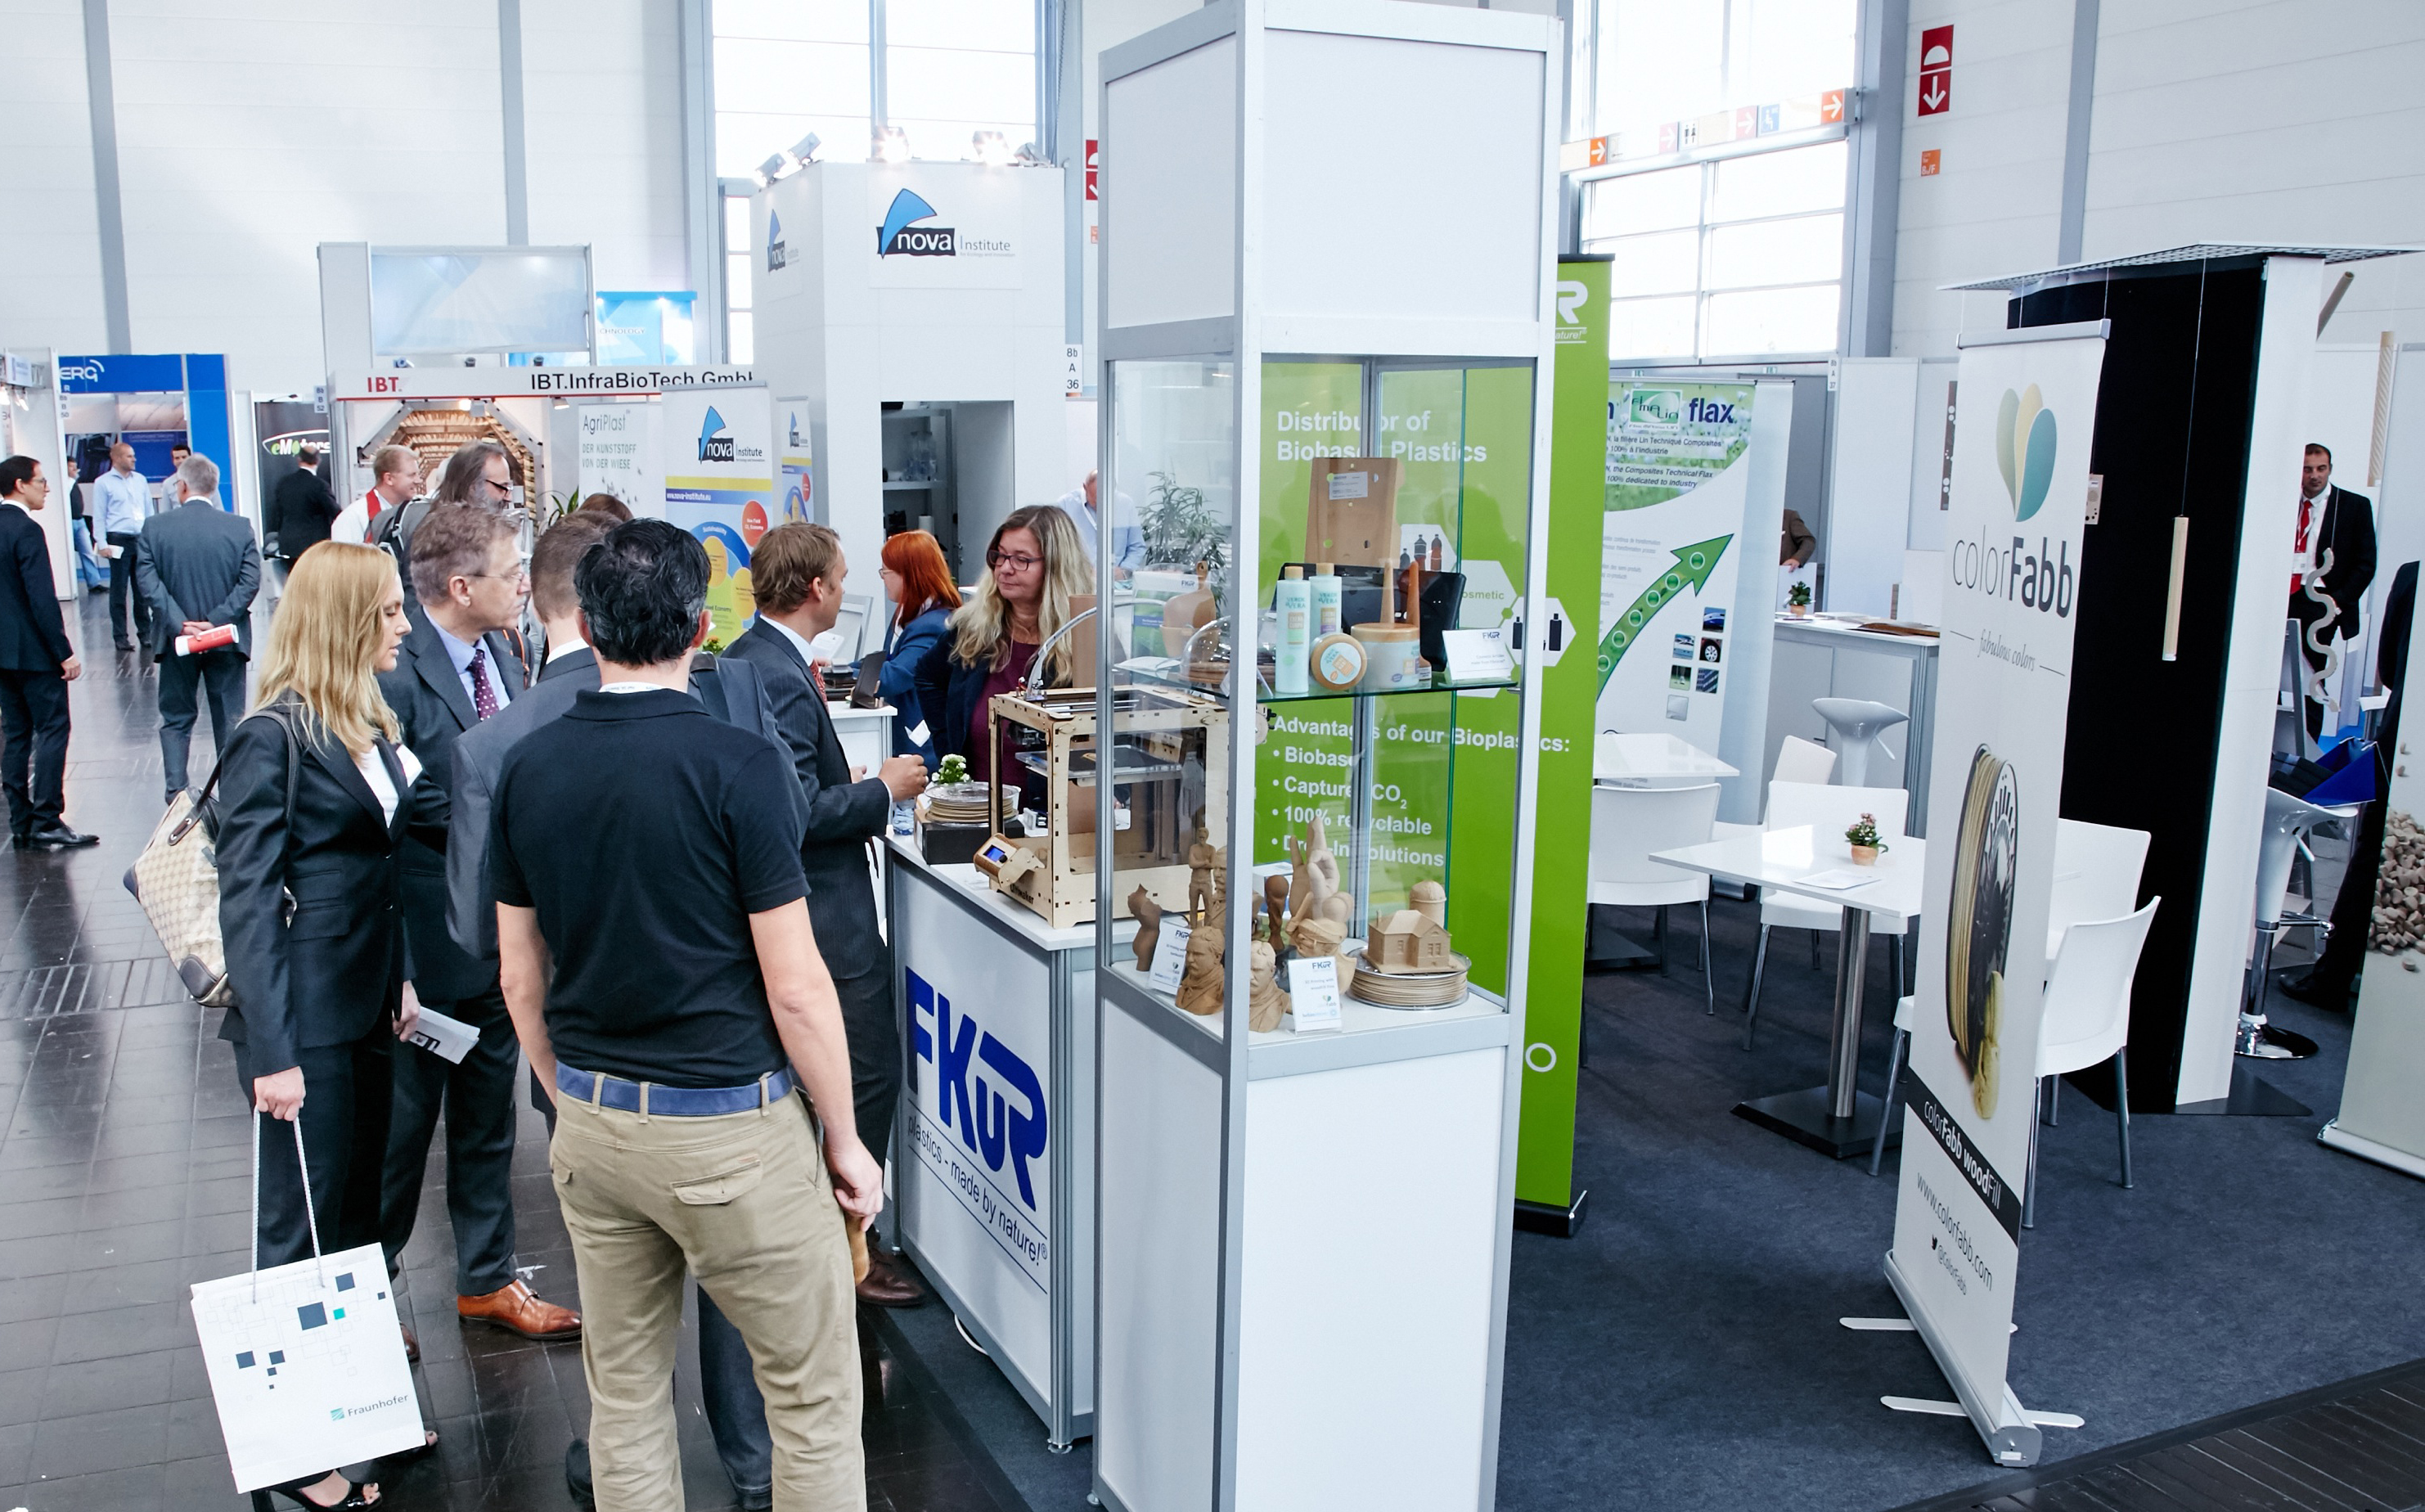 The highlight for Composites Europe 2015 is the 1st International Composites Congress (ICC), which takes place 21-22 September in Stuttgart. © Composites Europe 